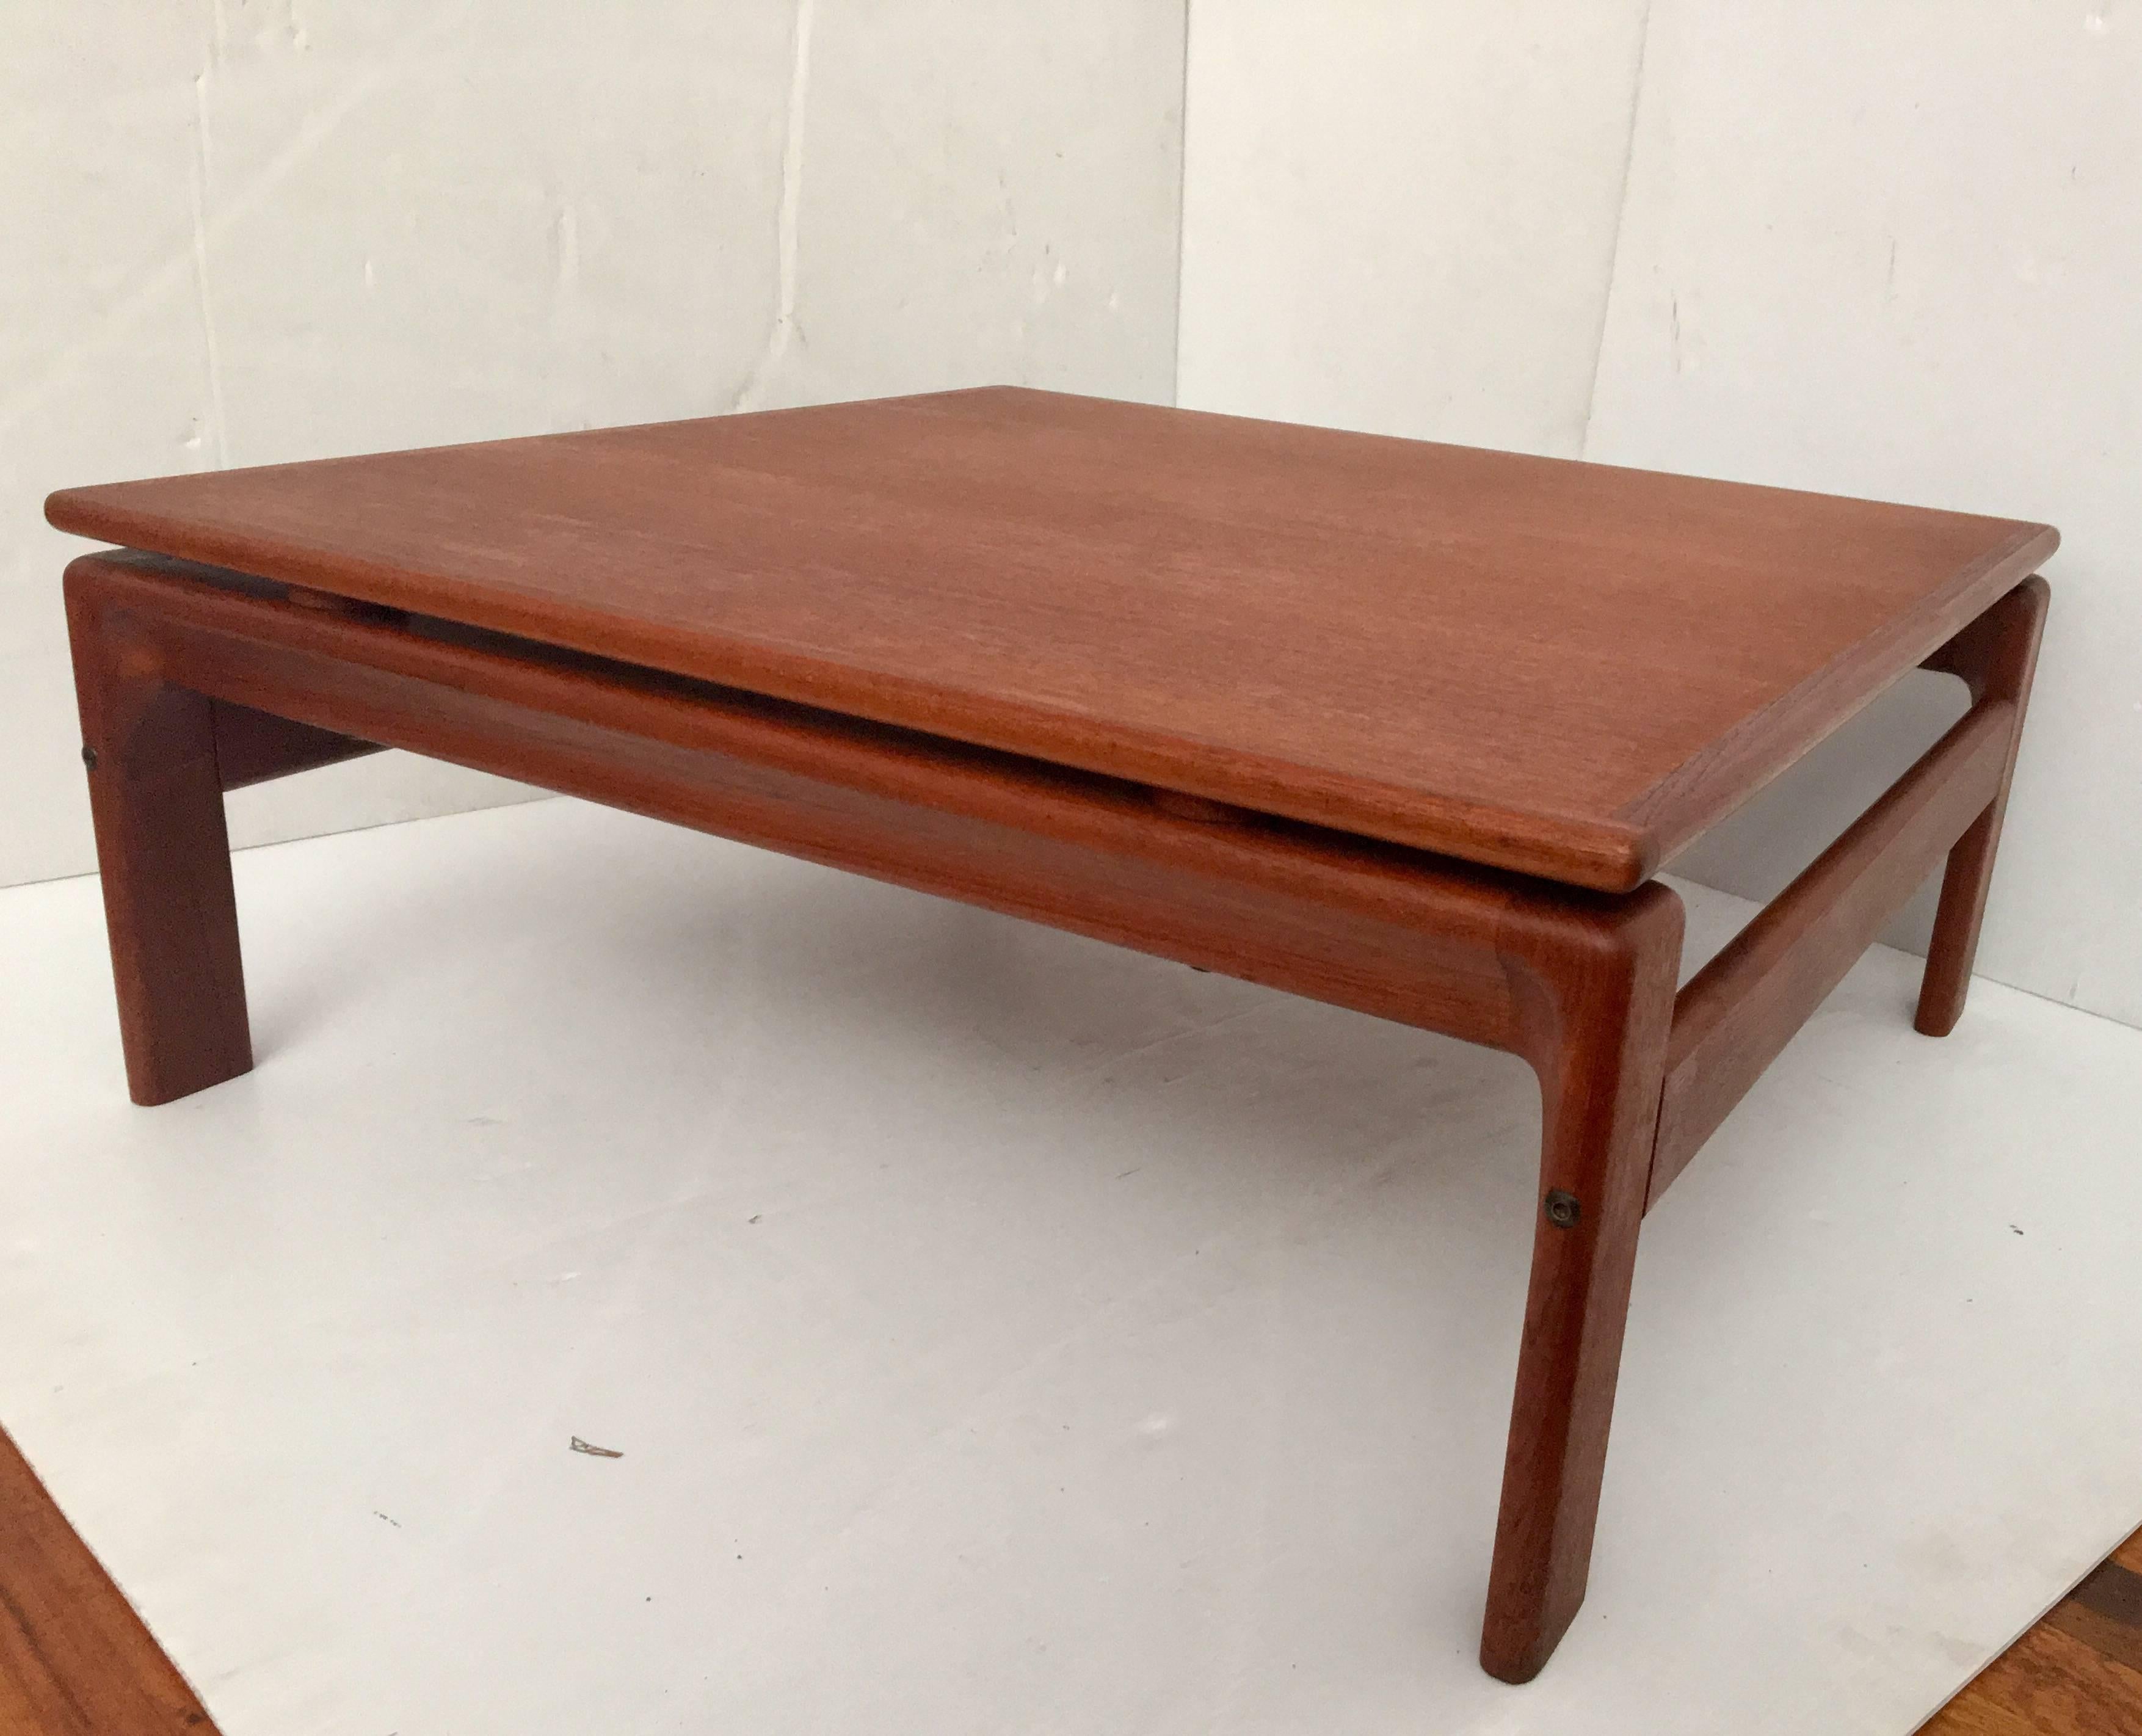 Simple elegant low coffee table, circa 1960s, Made by Komfort, in solid teak legs, totally restored and refinish with hand rubbed teak oil finish, nice condition solid and sturdy a rare piece to find. Nice sculpted leg base.